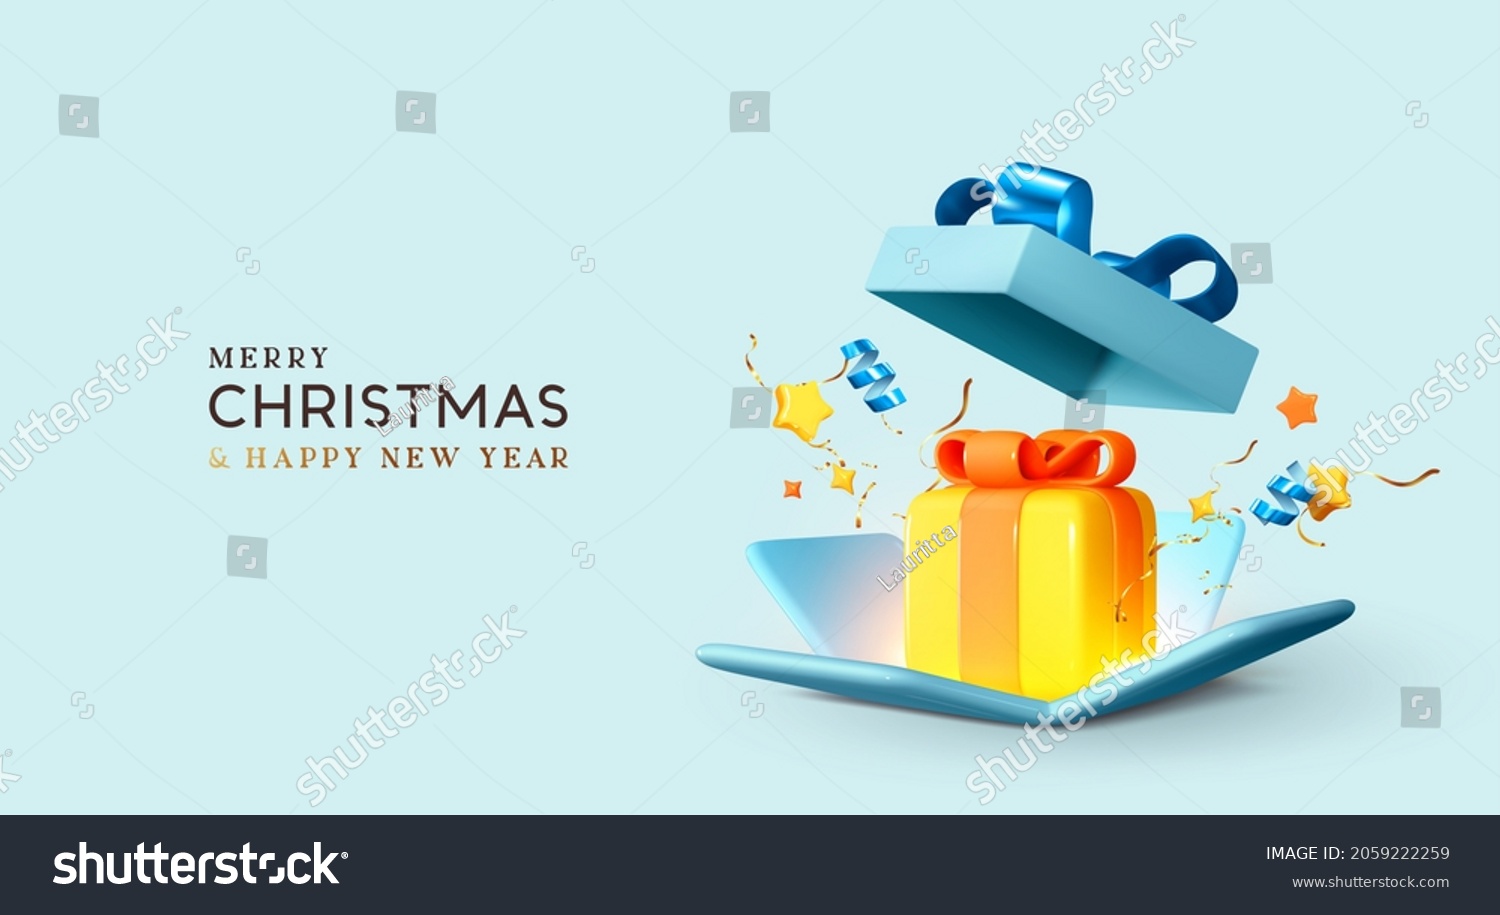 Merry Christmas and Happy New Year. Background with realistic 3d festive blue open gifts box. Xmas sale present. Holiday decorative yellow boxes, Holiday gift surprise. Vector illustration #2059222259